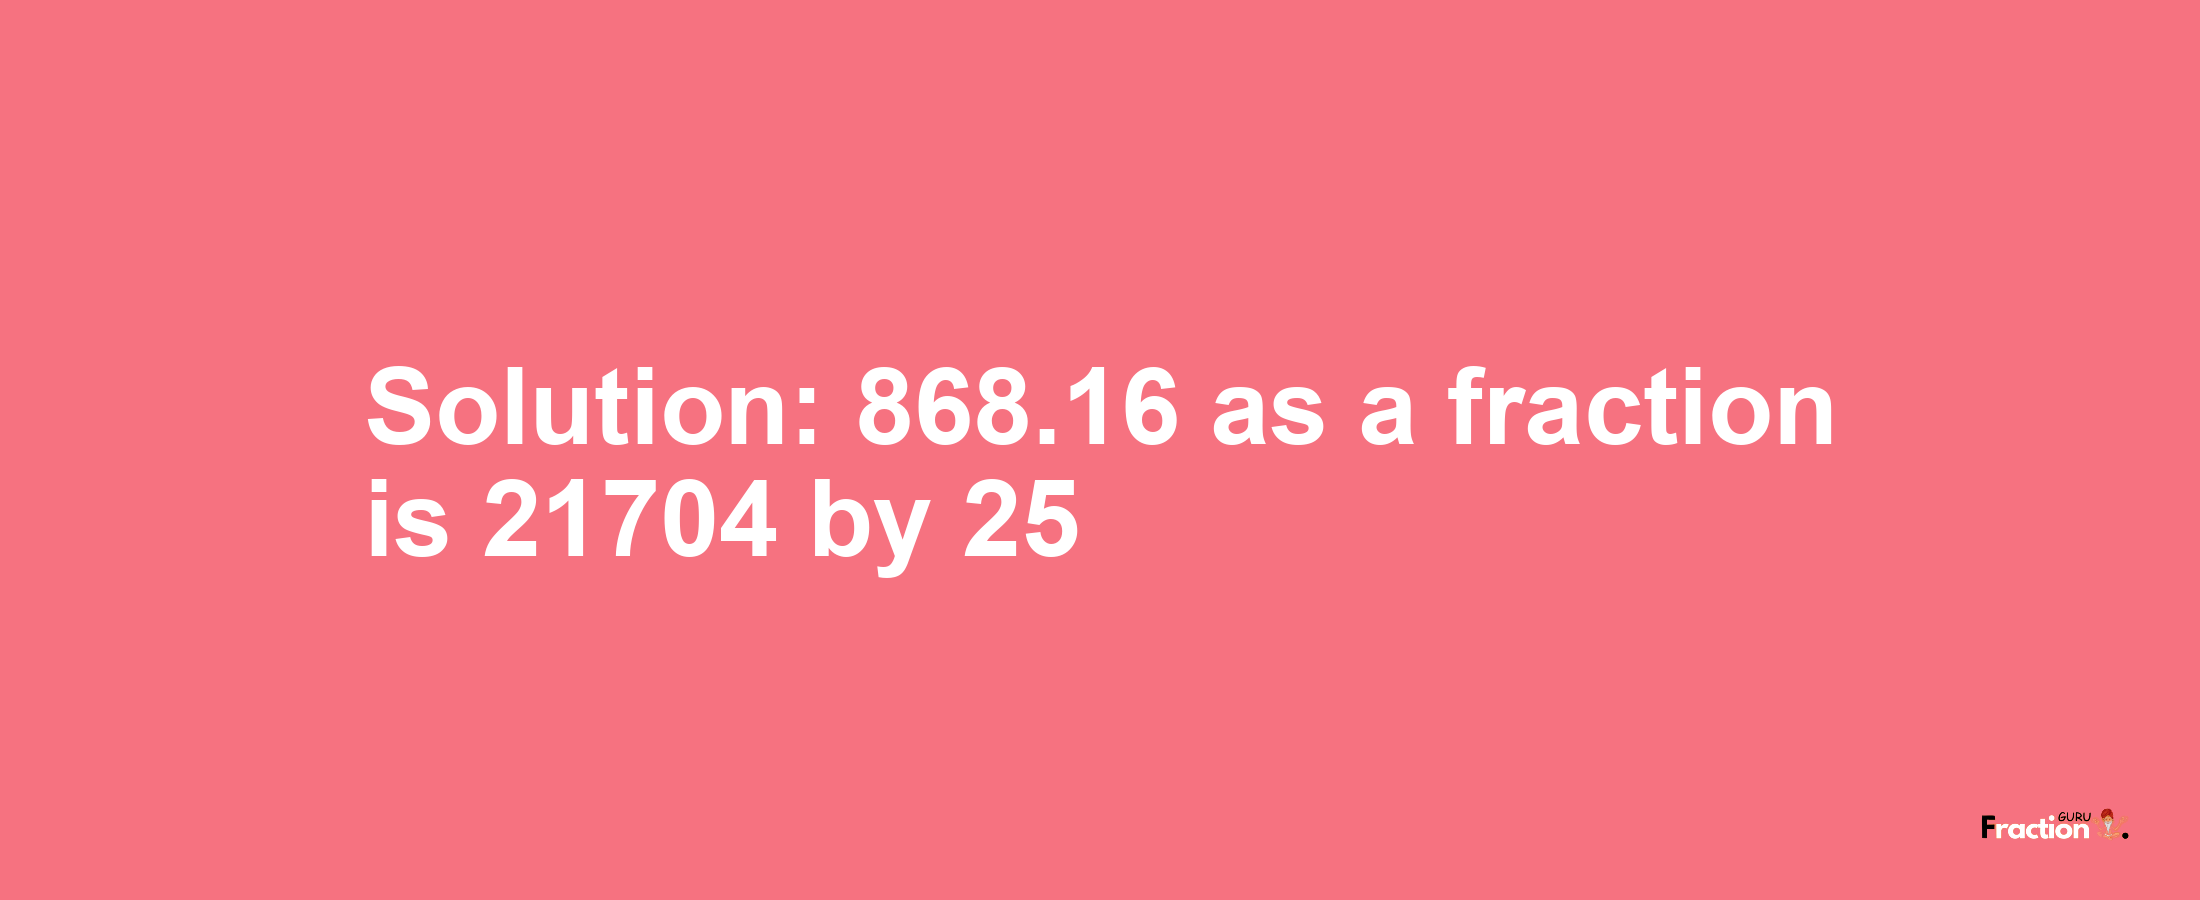 Solution:868.16 as a fraction is 21704/25